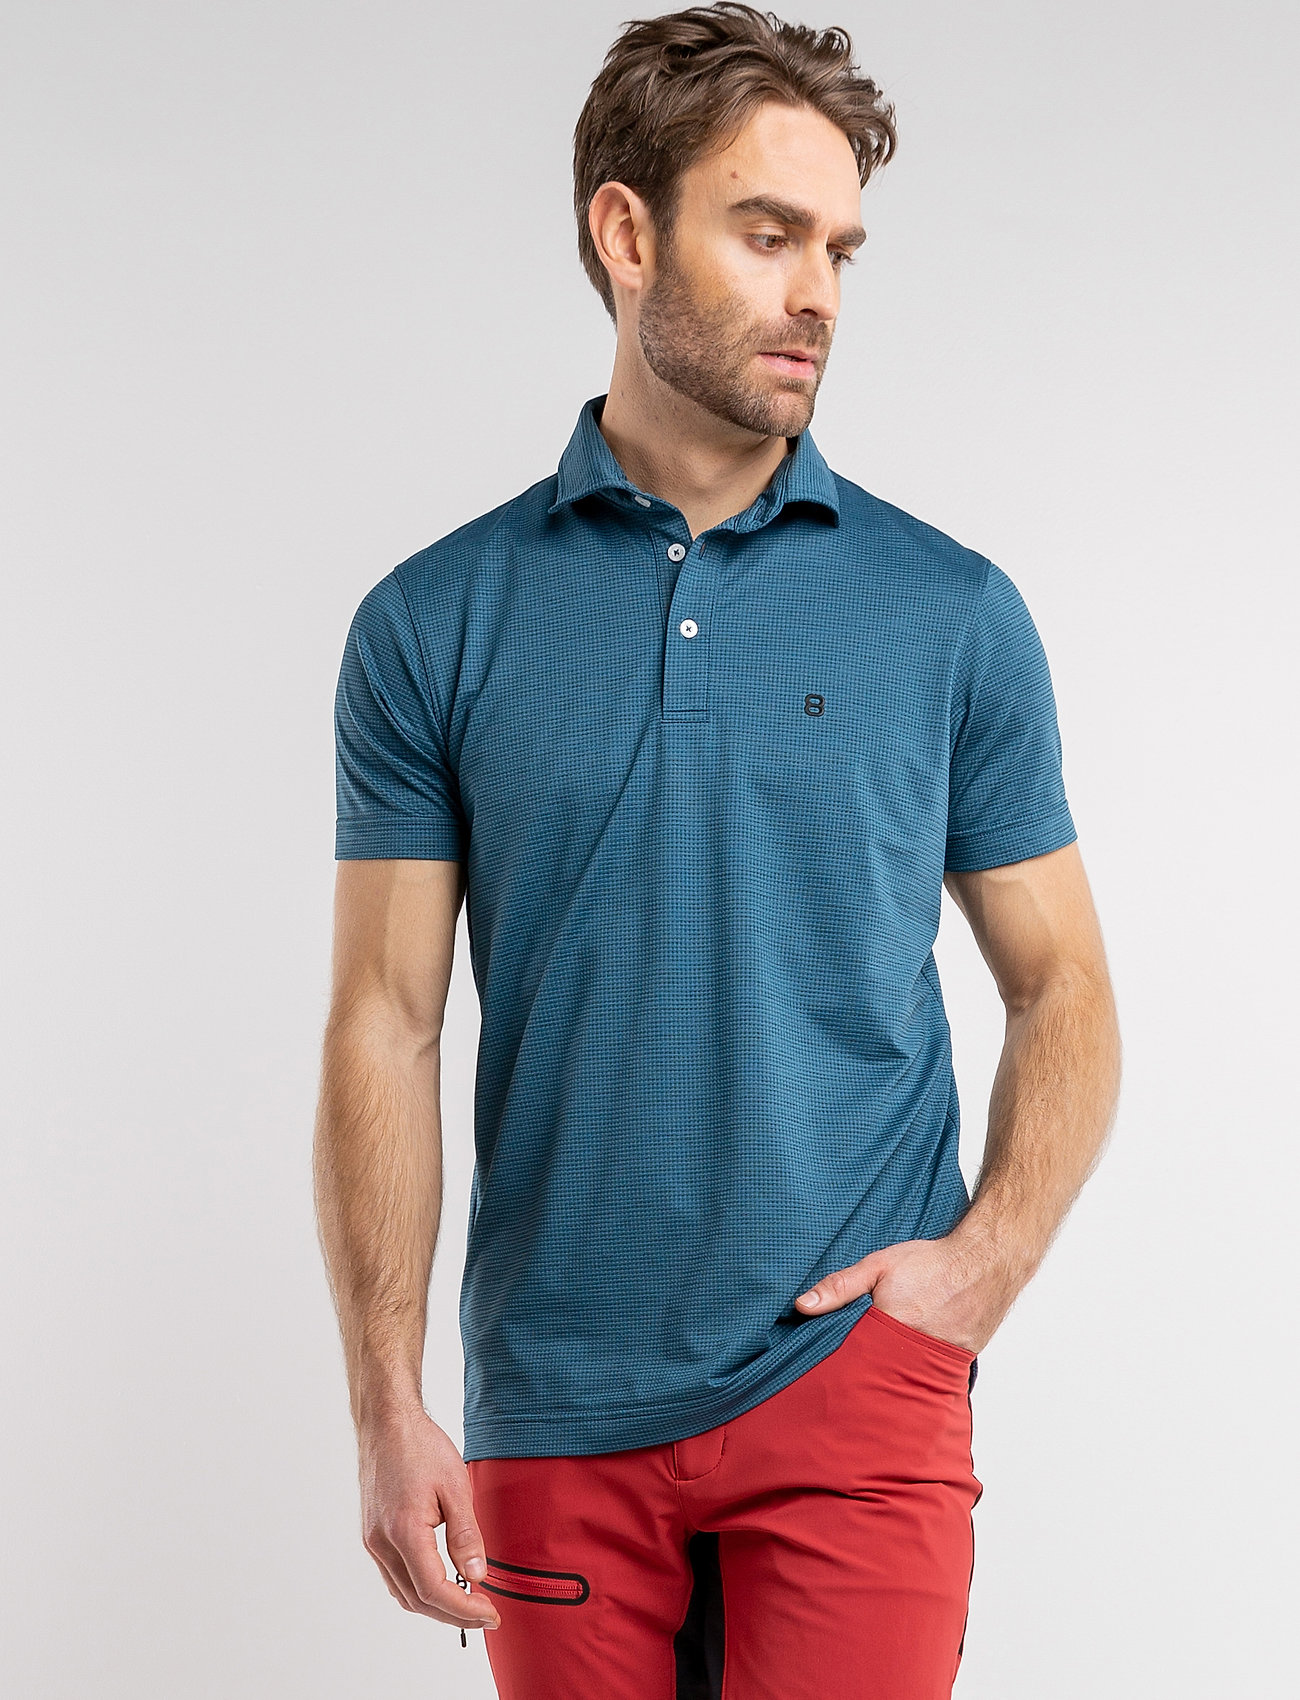 polo shirt 8848,Save up to 17%,www.ilcascinone.com